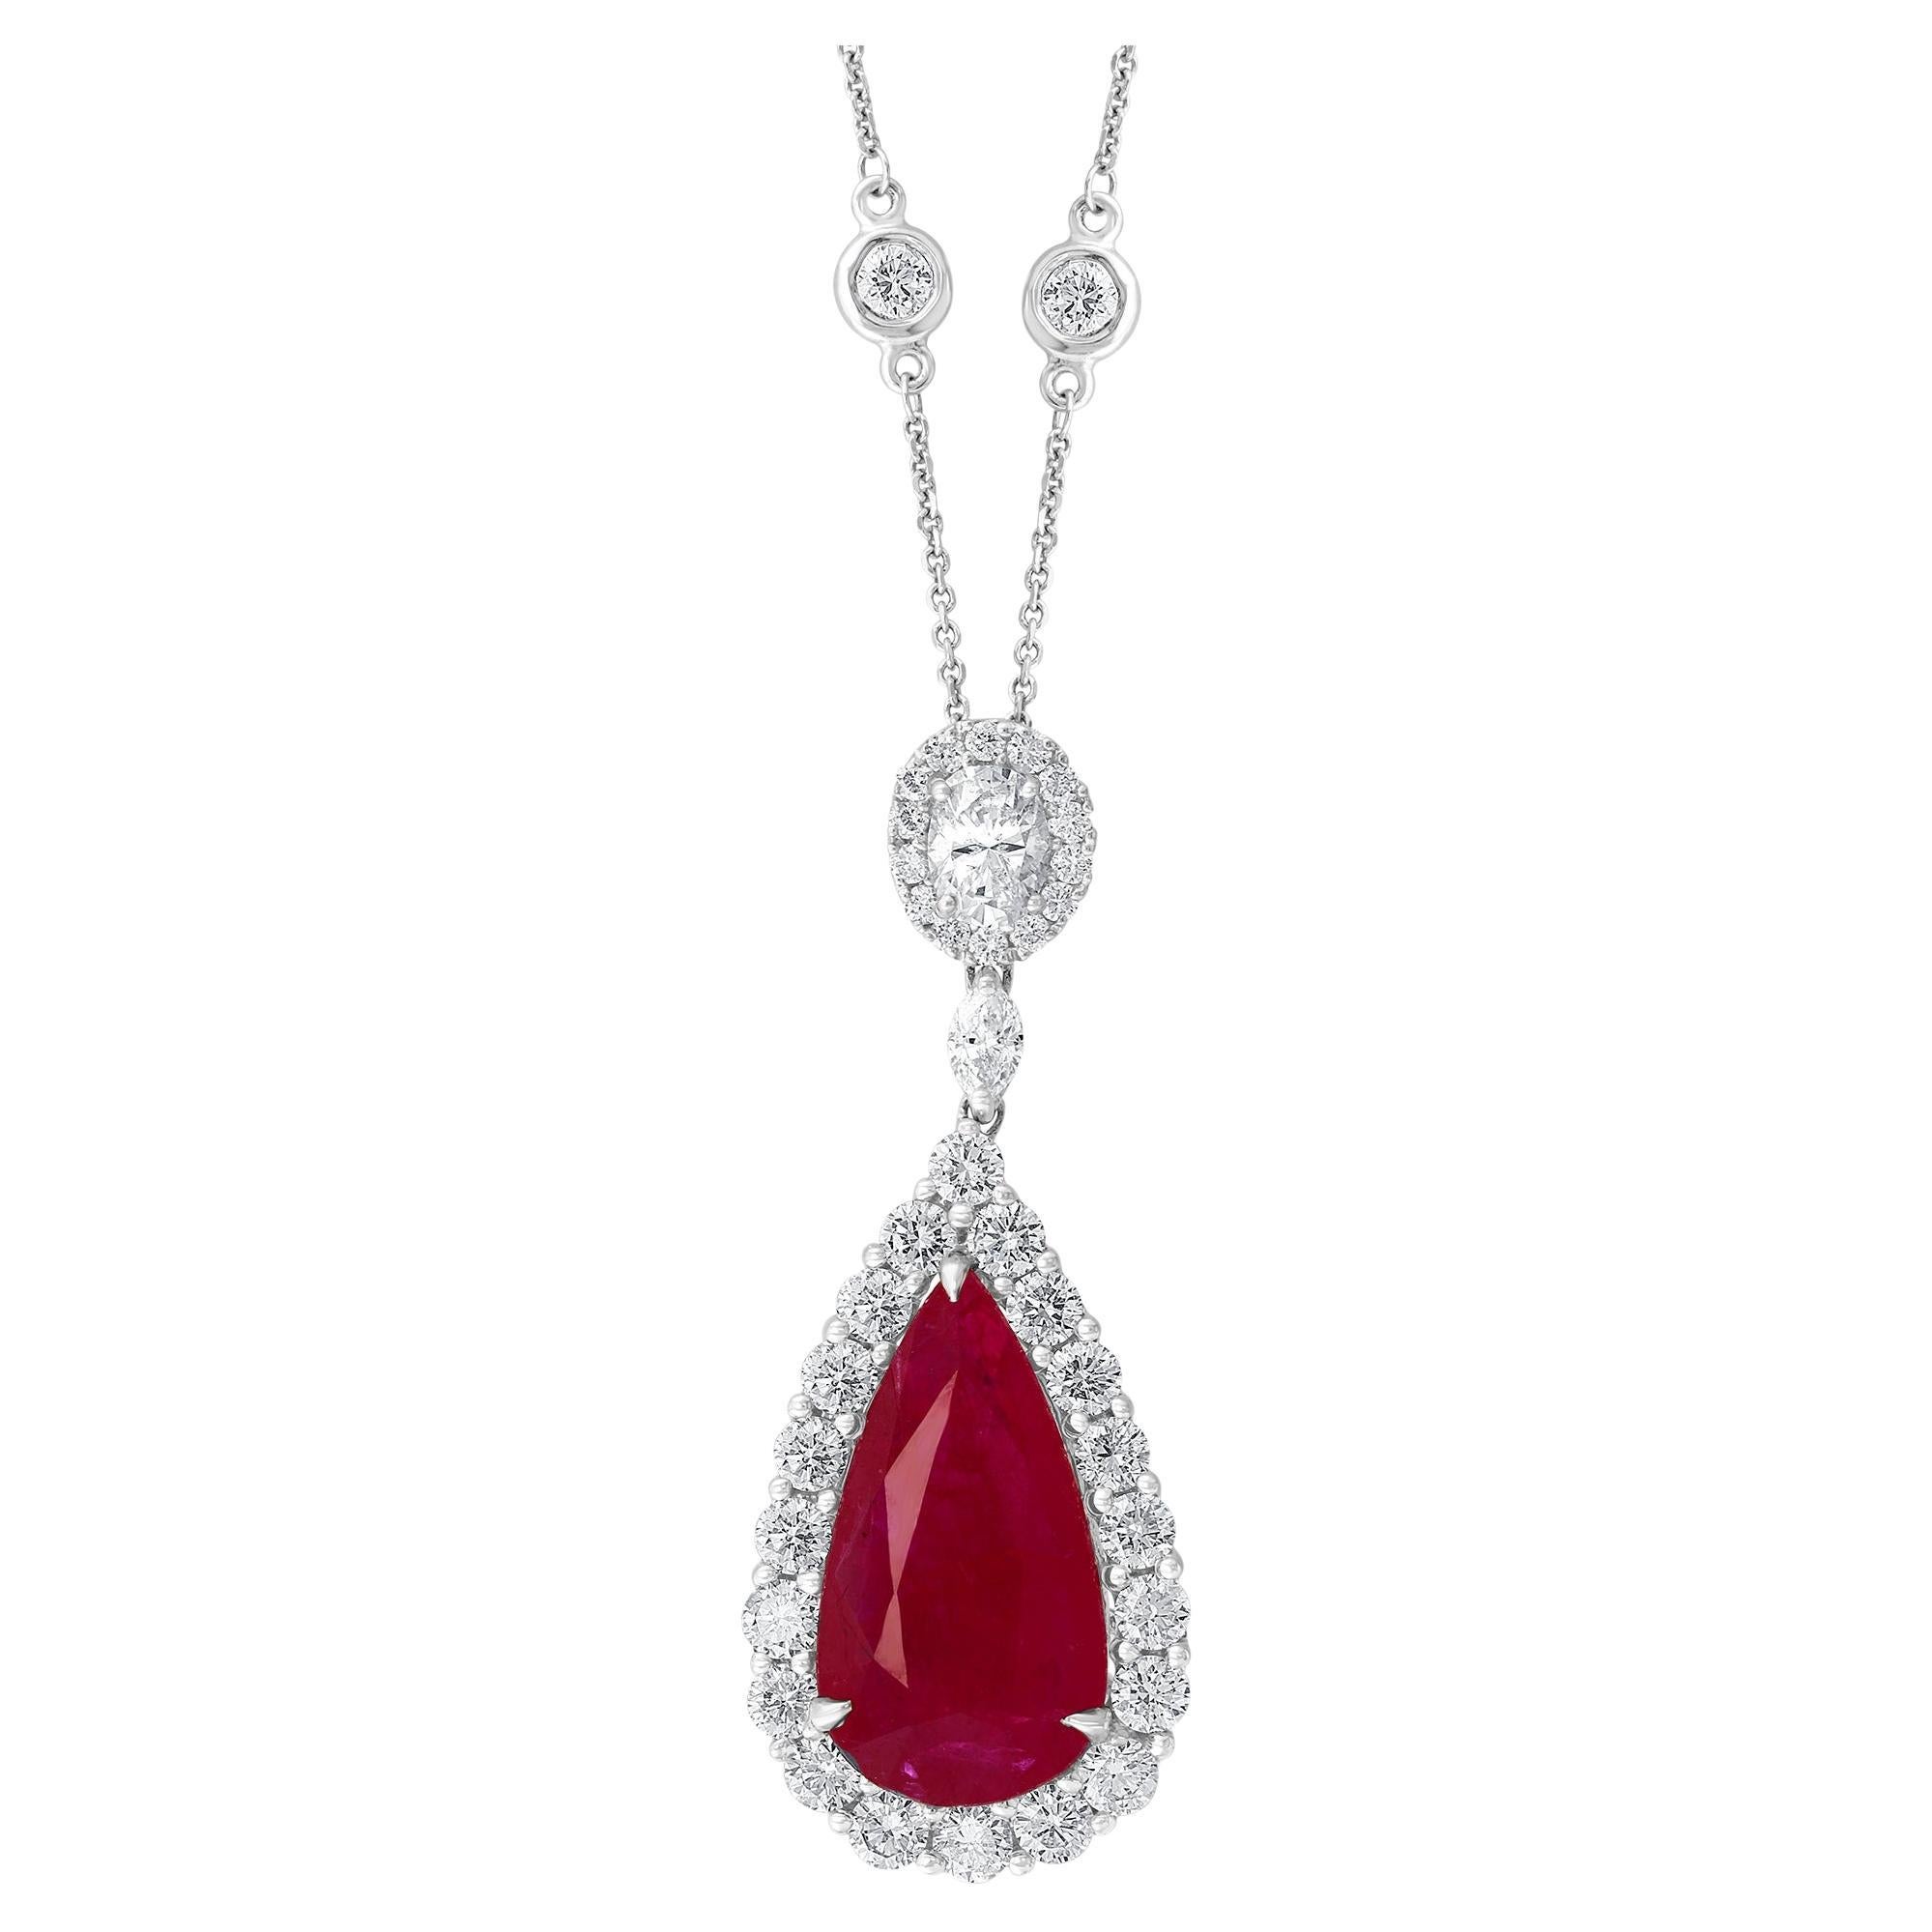 7.20 Carat Pear Shape Ruby and Diamond Halo Drop Necklace in 18K White Gold